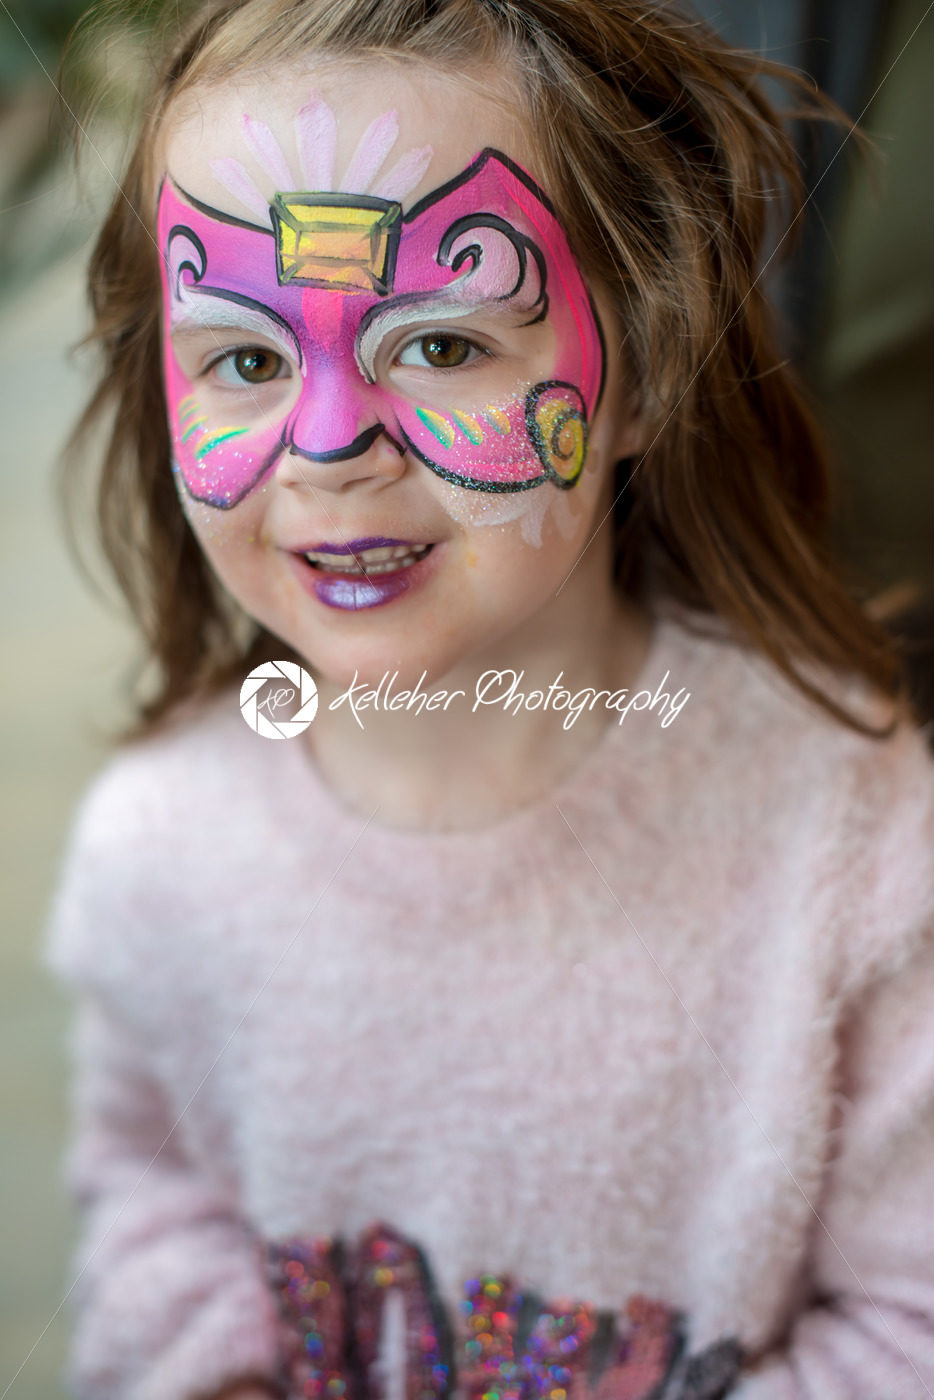 Pretty excited cute young girl with face painting like a butterfly - Kelleher Photography Store